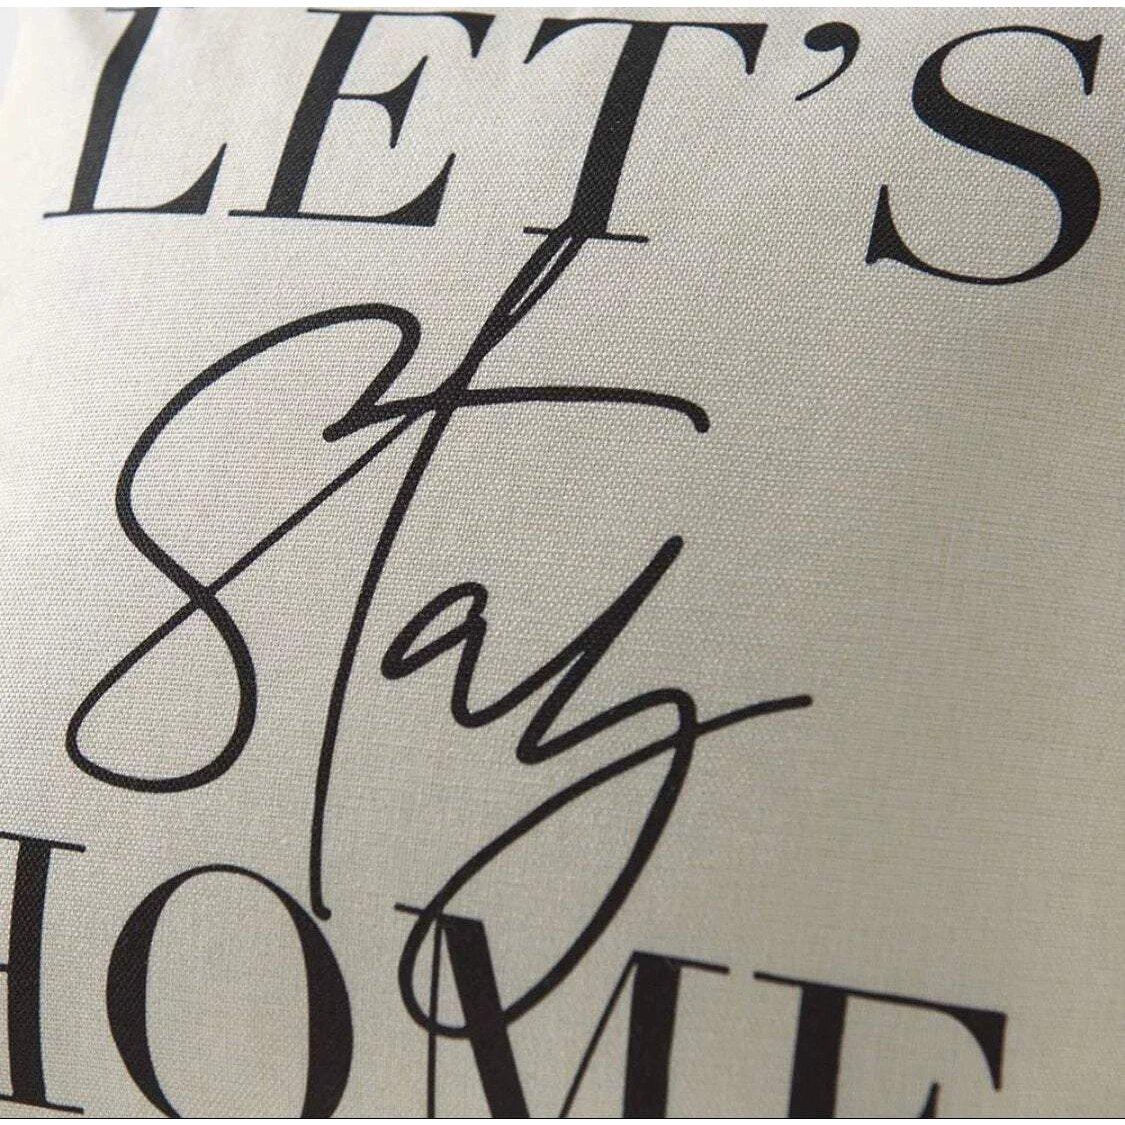 Cream throw cushion with black 'Lets Stay Home' text, close up.